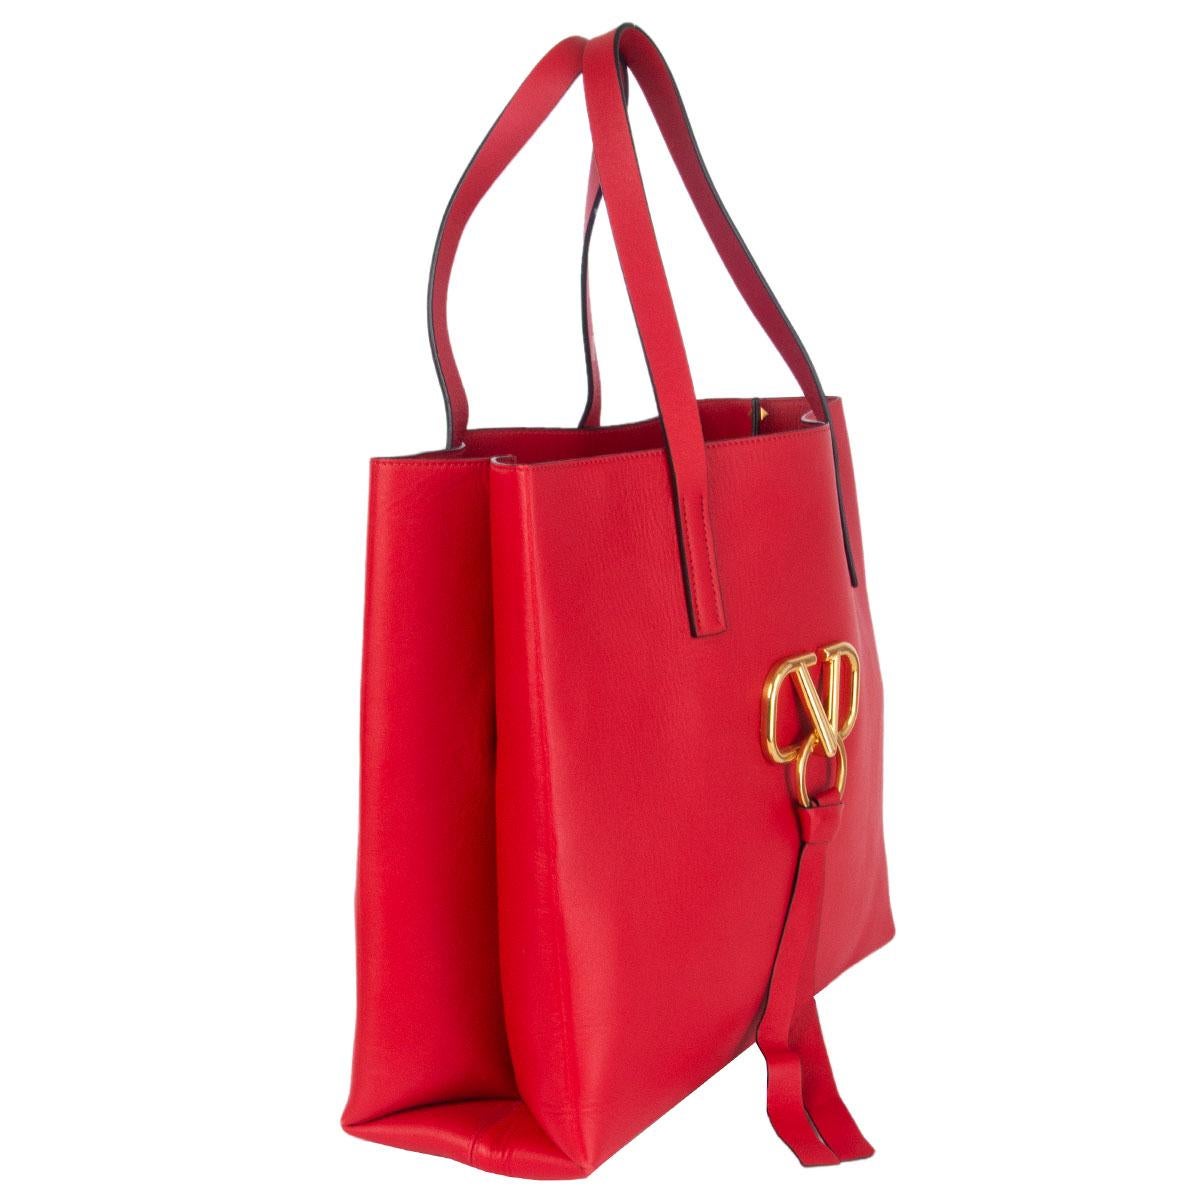 100% authentic Valentino large VRING tote bag in red leather featuring gold-tone metal logo plaque attachment at the front that is decorated with a matching red leather trim keyring attachment. Lined in red leather with detachable internal leather